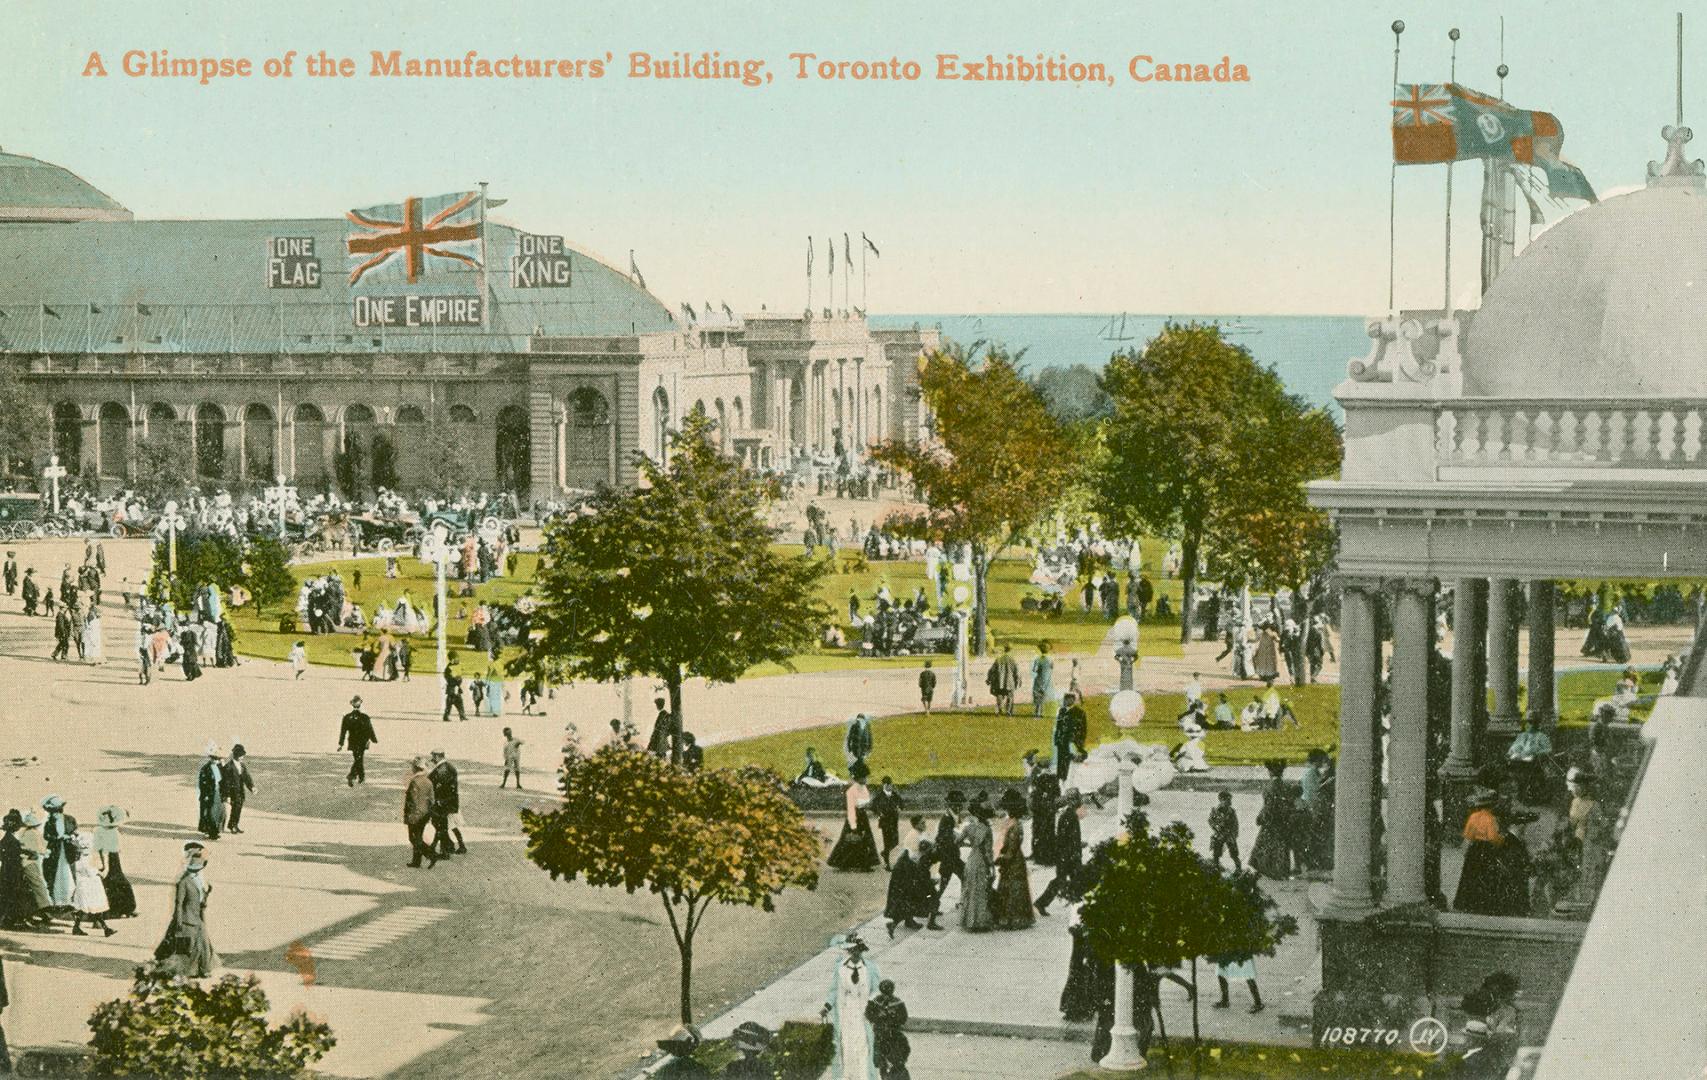 A Glimpse of the Manufacturers' Building, Toronto Exhibition, Canada